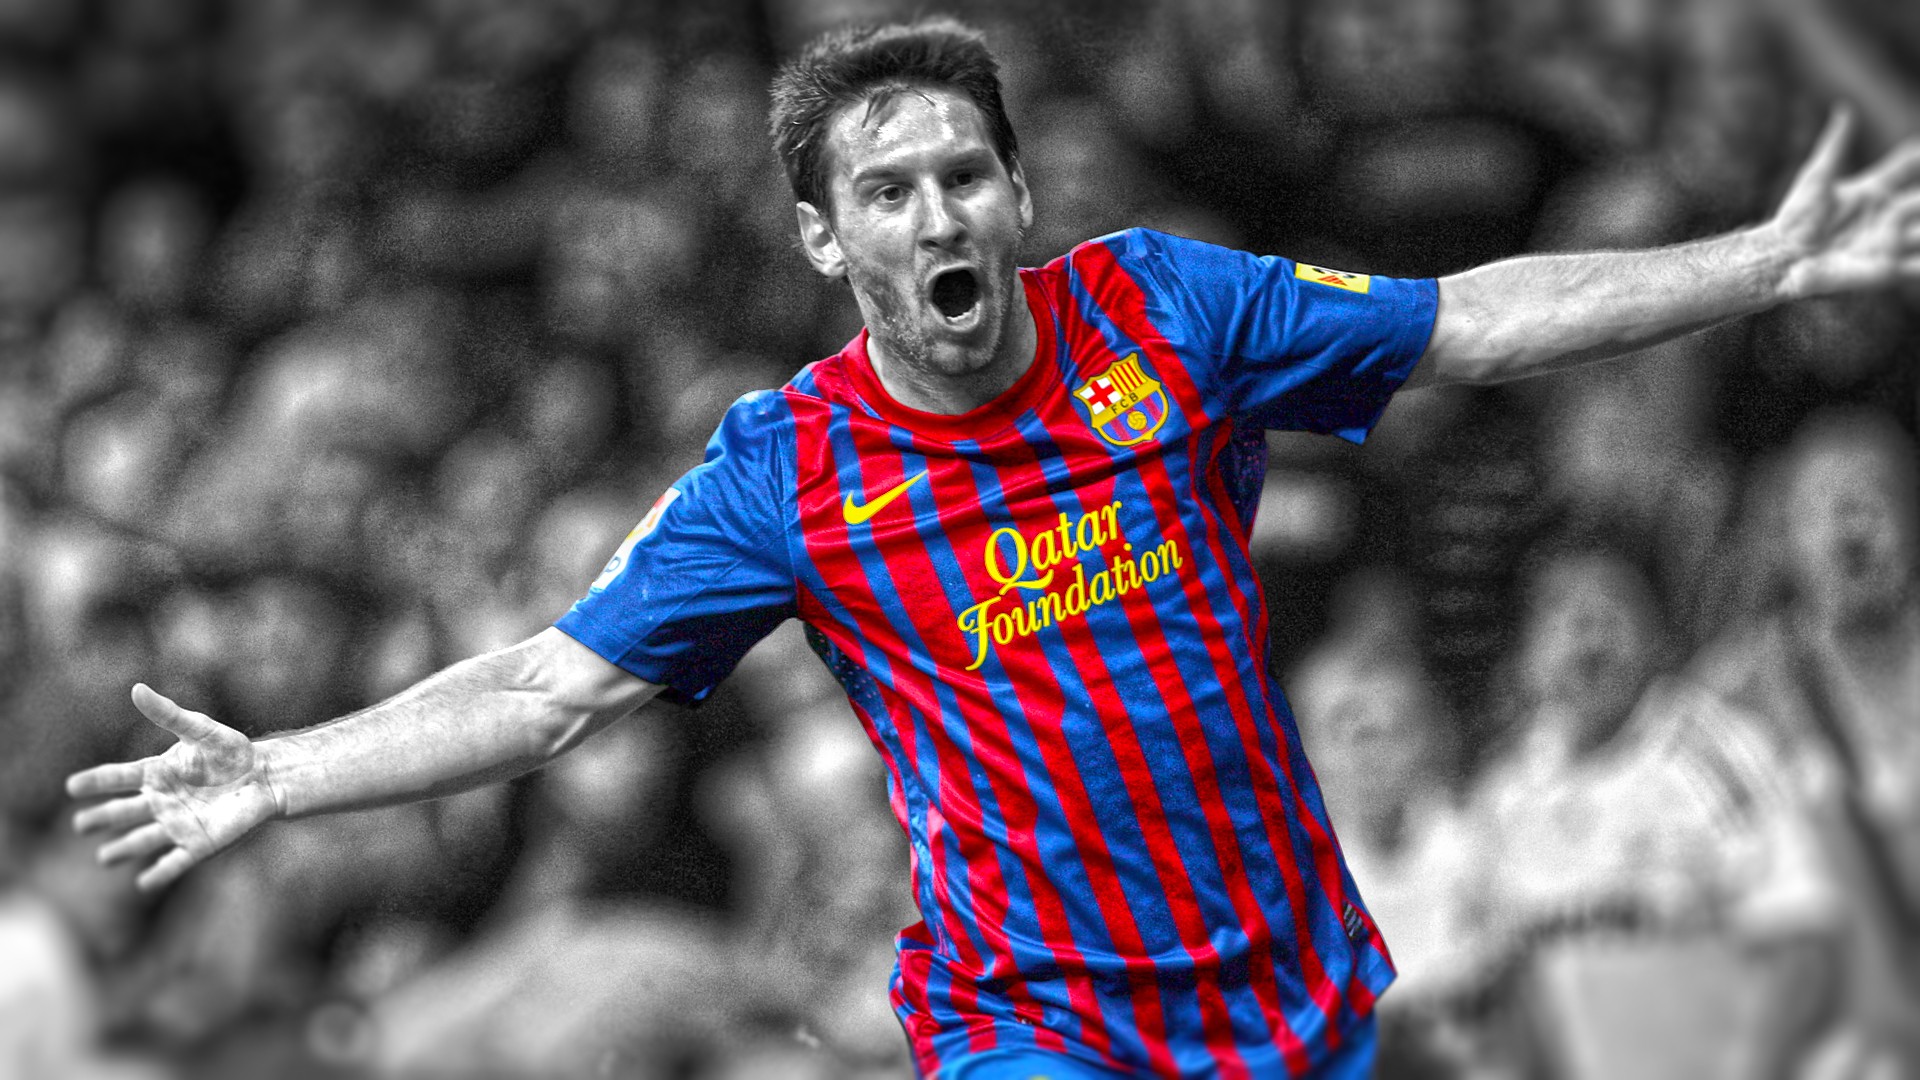 messi wallpaper free download,football player,player,soccer player,sports equipment,team sport